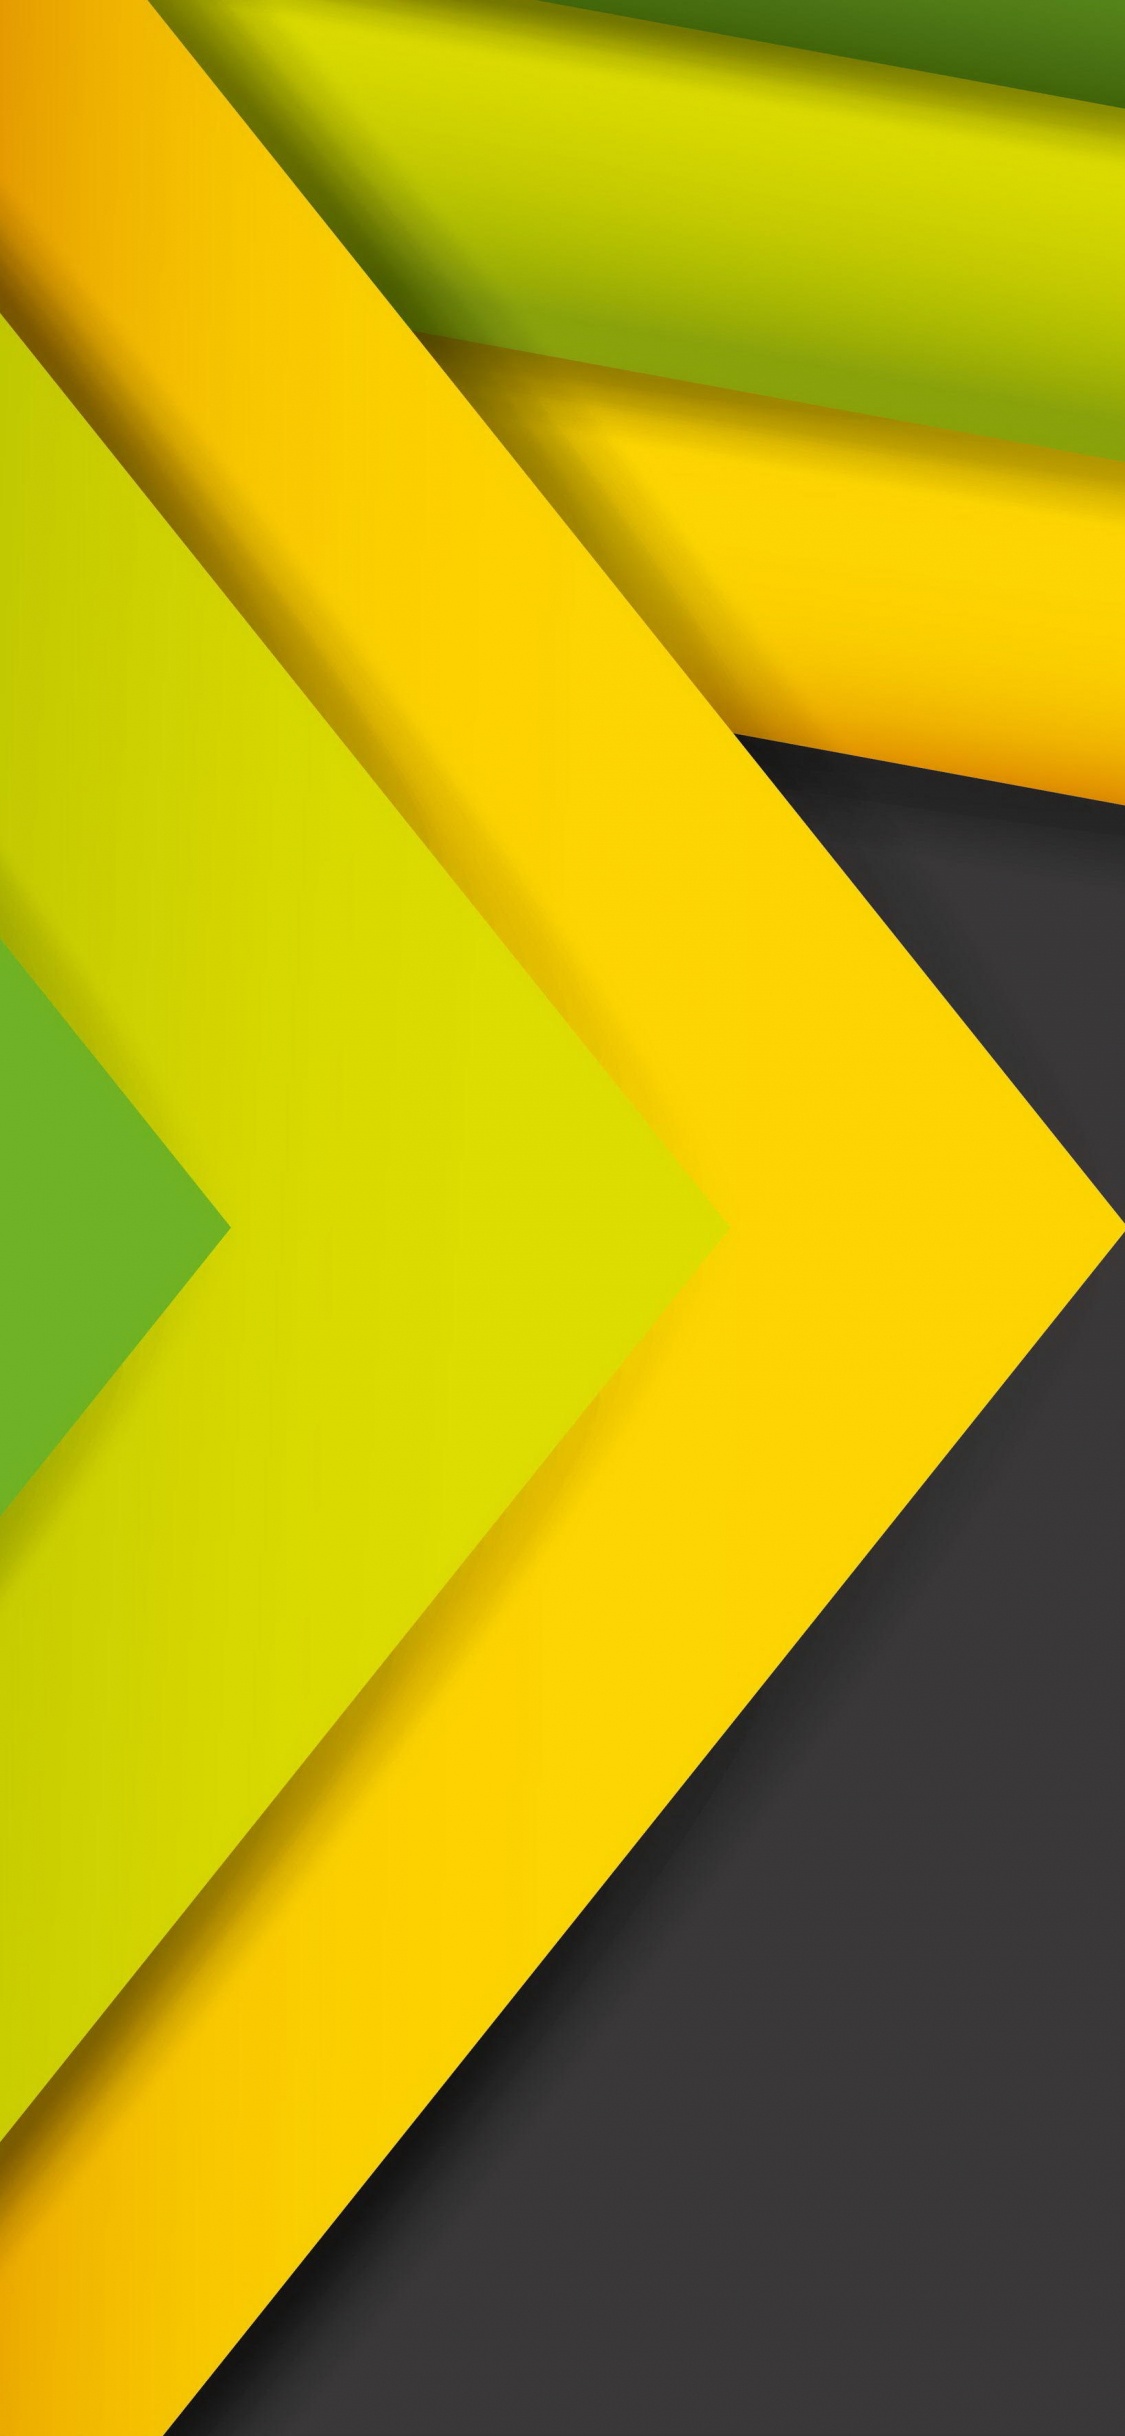 Yellow and Green Triangle Illustration. Wallpaper in 1125x2436 Resolution